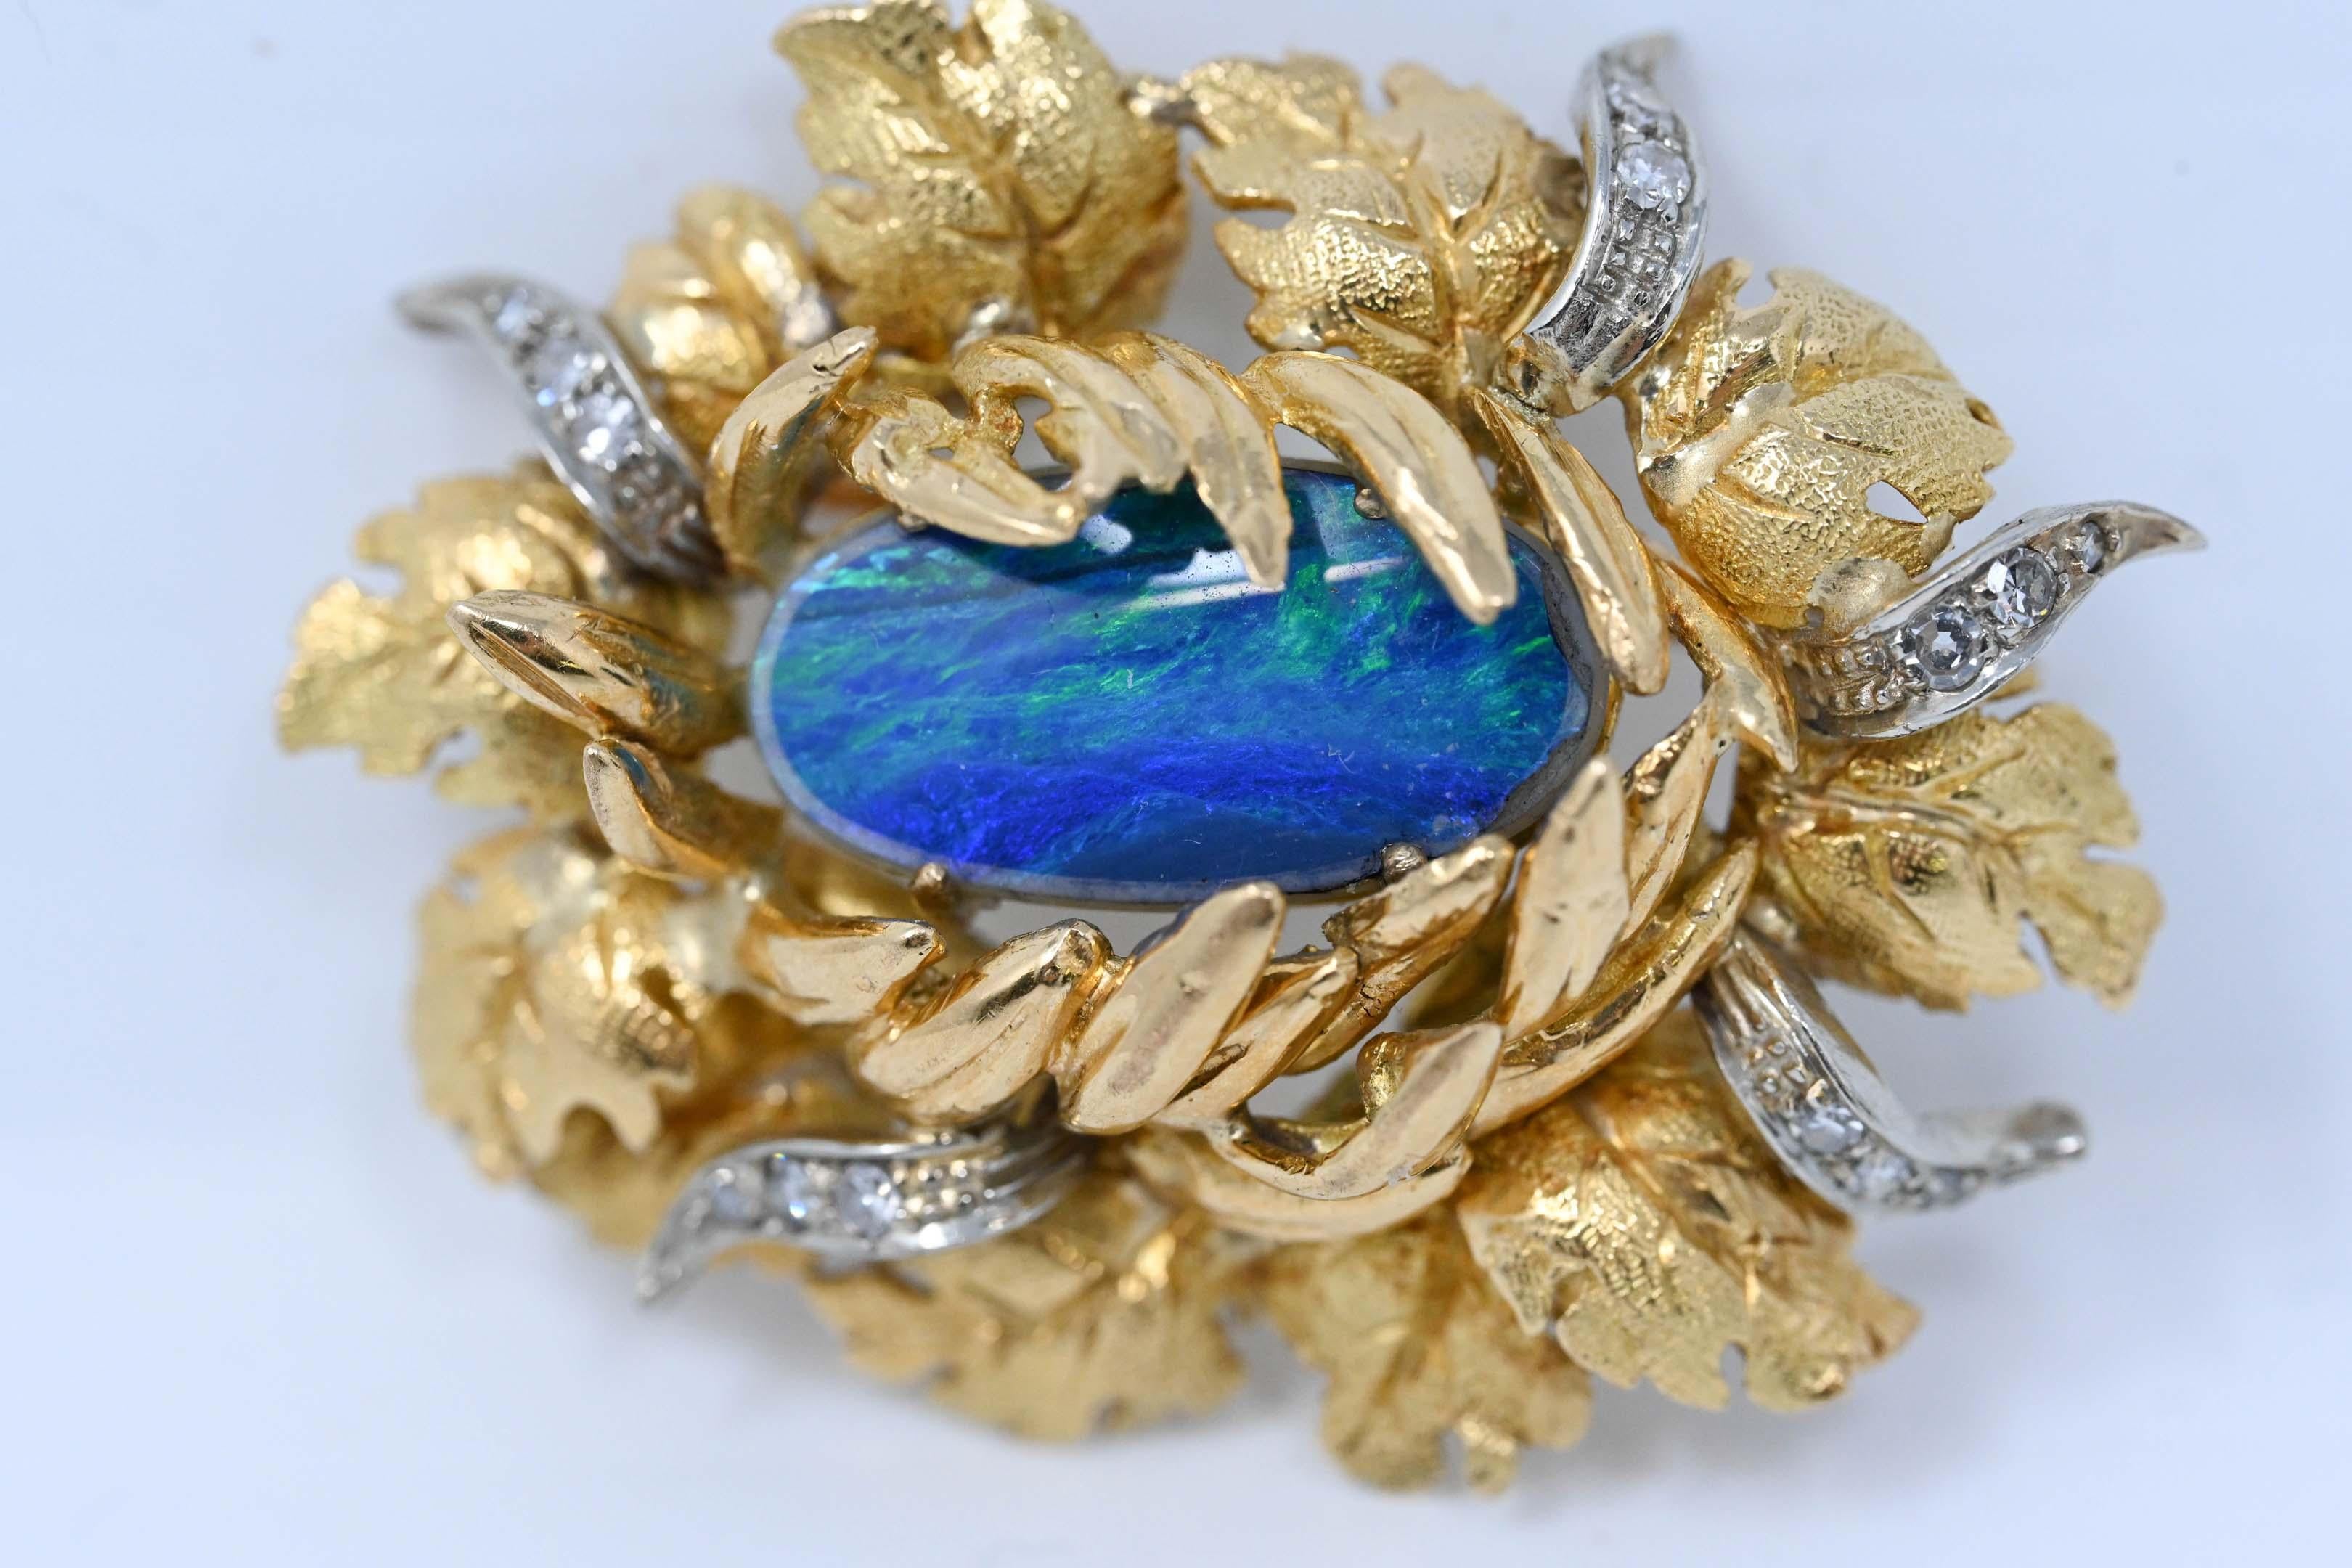 18k yellow gold , opal gemstone and 15 genuine diamond brooch. Unmarked, tested 18k, 40mm long x 33mm wide. Opal, measures about 18mm x 10mm. Maker unknown, weighs 13.9 grams.
